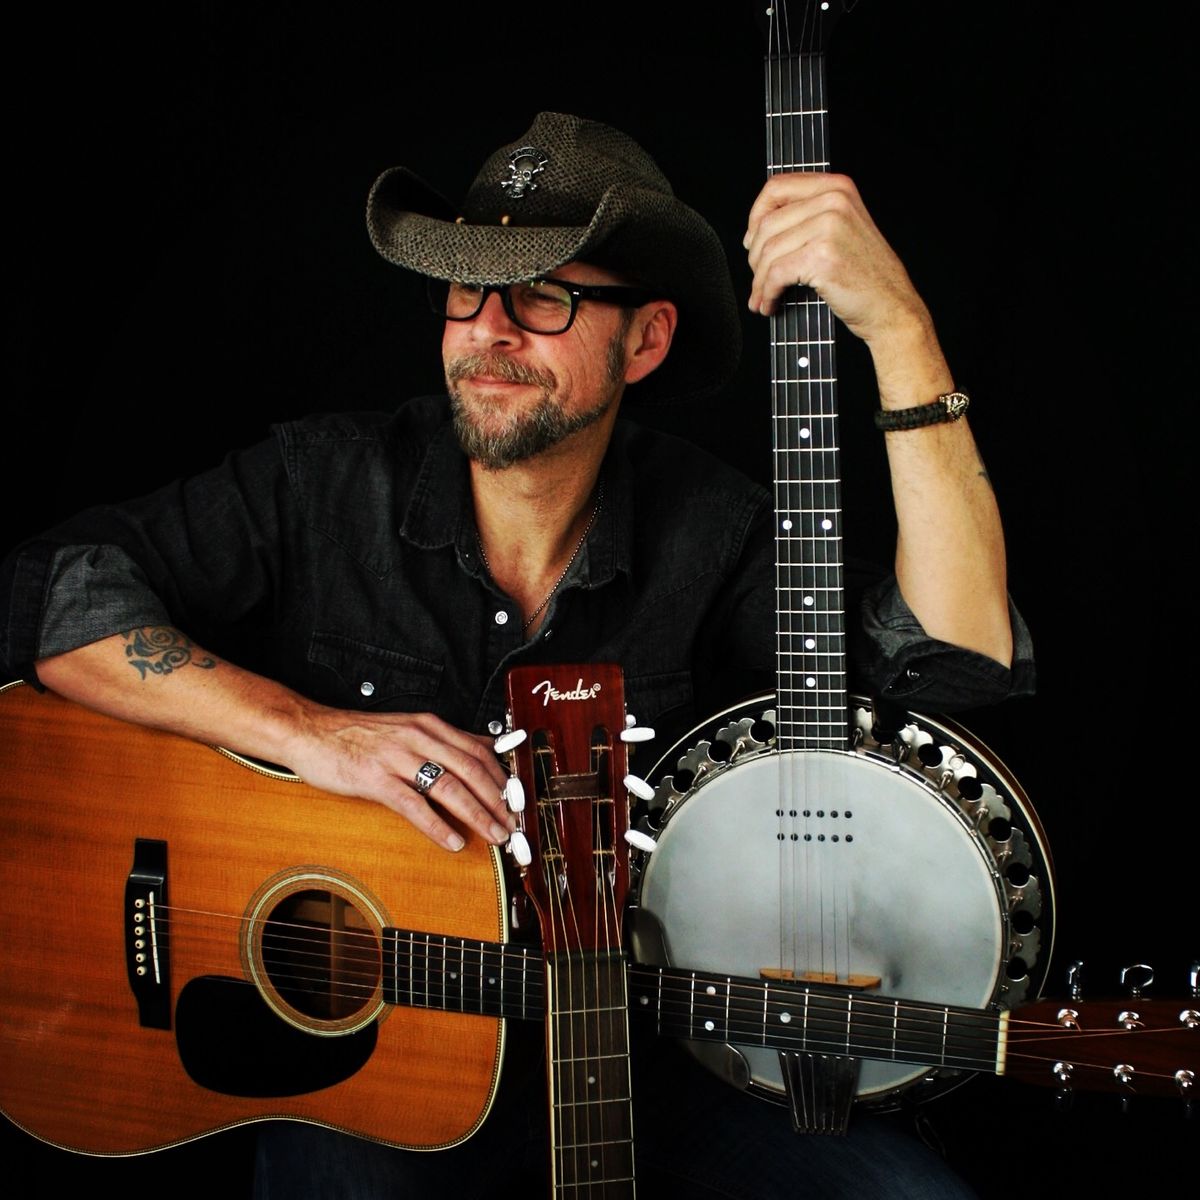 Thursday Night Music Series - Lyle Ronglien